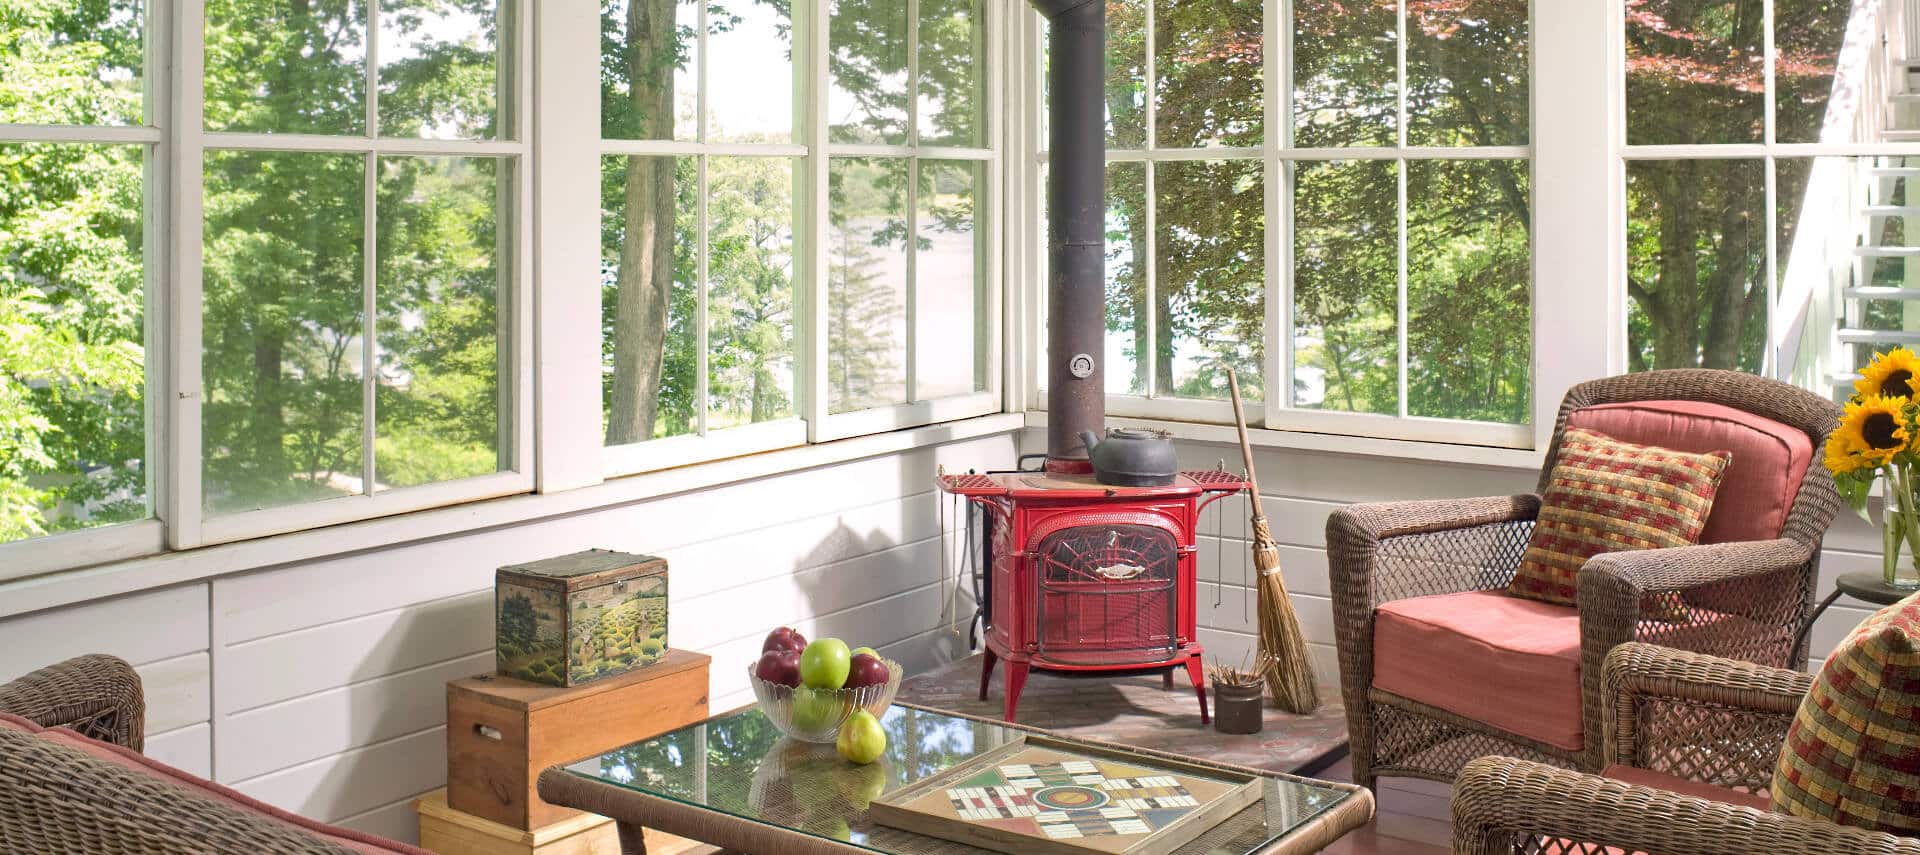 Sunny room with many windows holds cchairs, a table and a red wood stove.